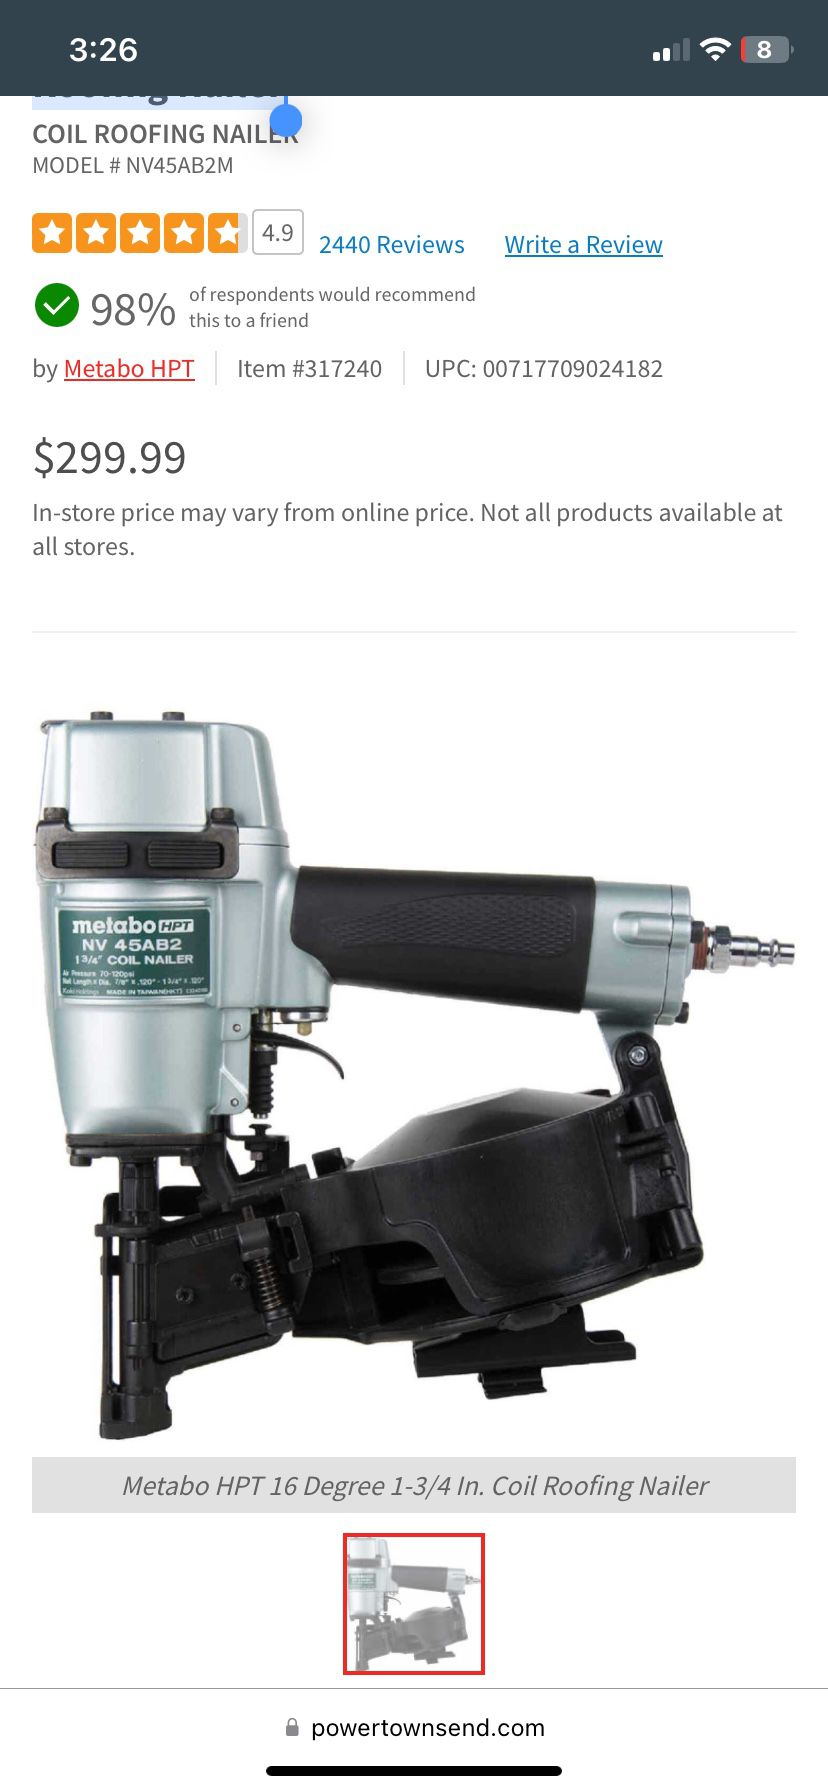  Metabo HPT 16 Degree 1-3/4 In. Coil Roofing Nailer